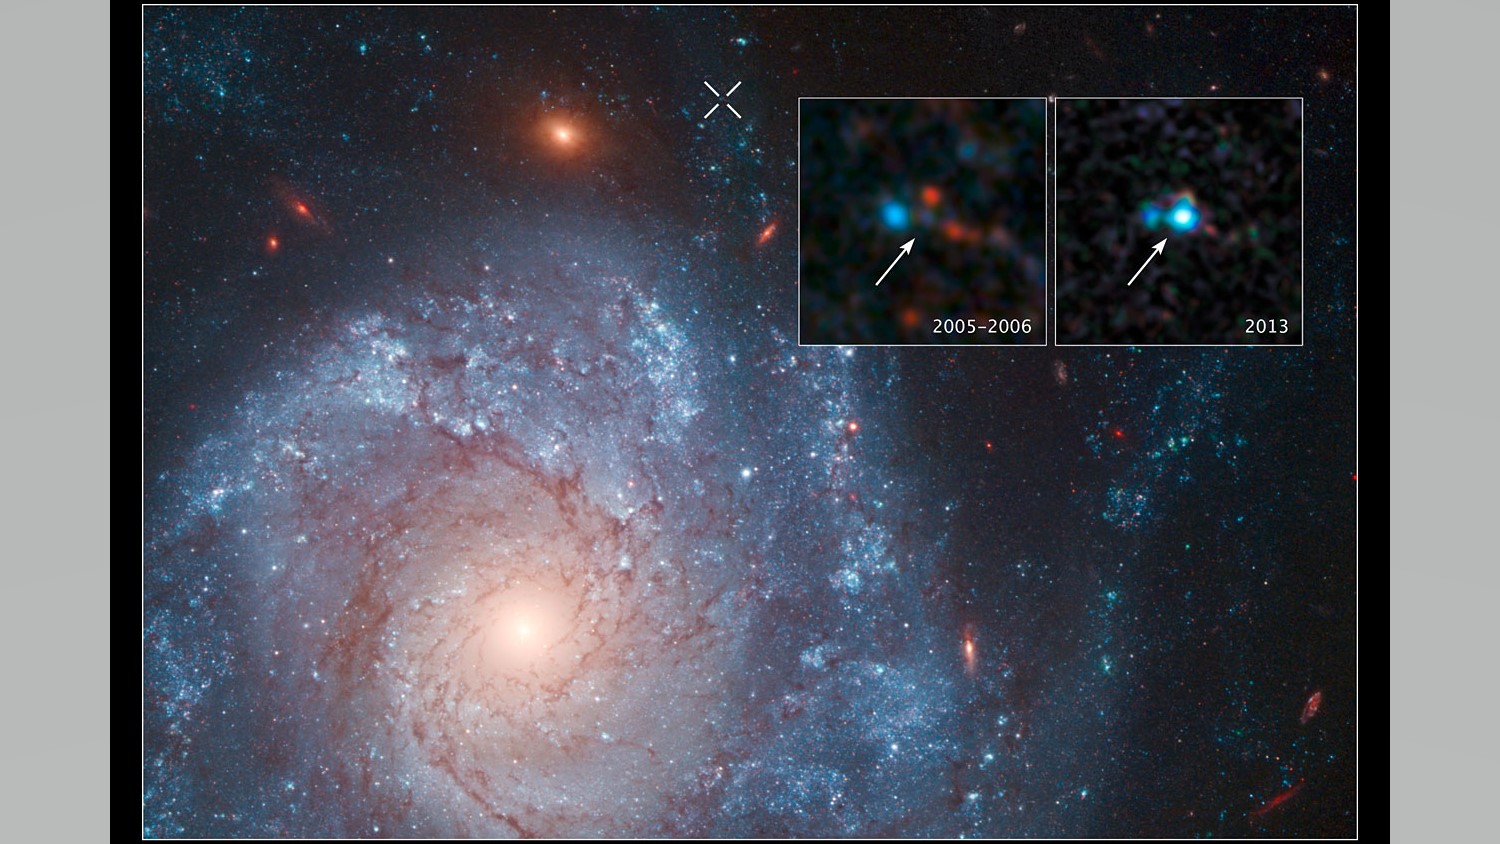 The Biggest Bang Theory: Astronomers Confirm a New Type of Supernova